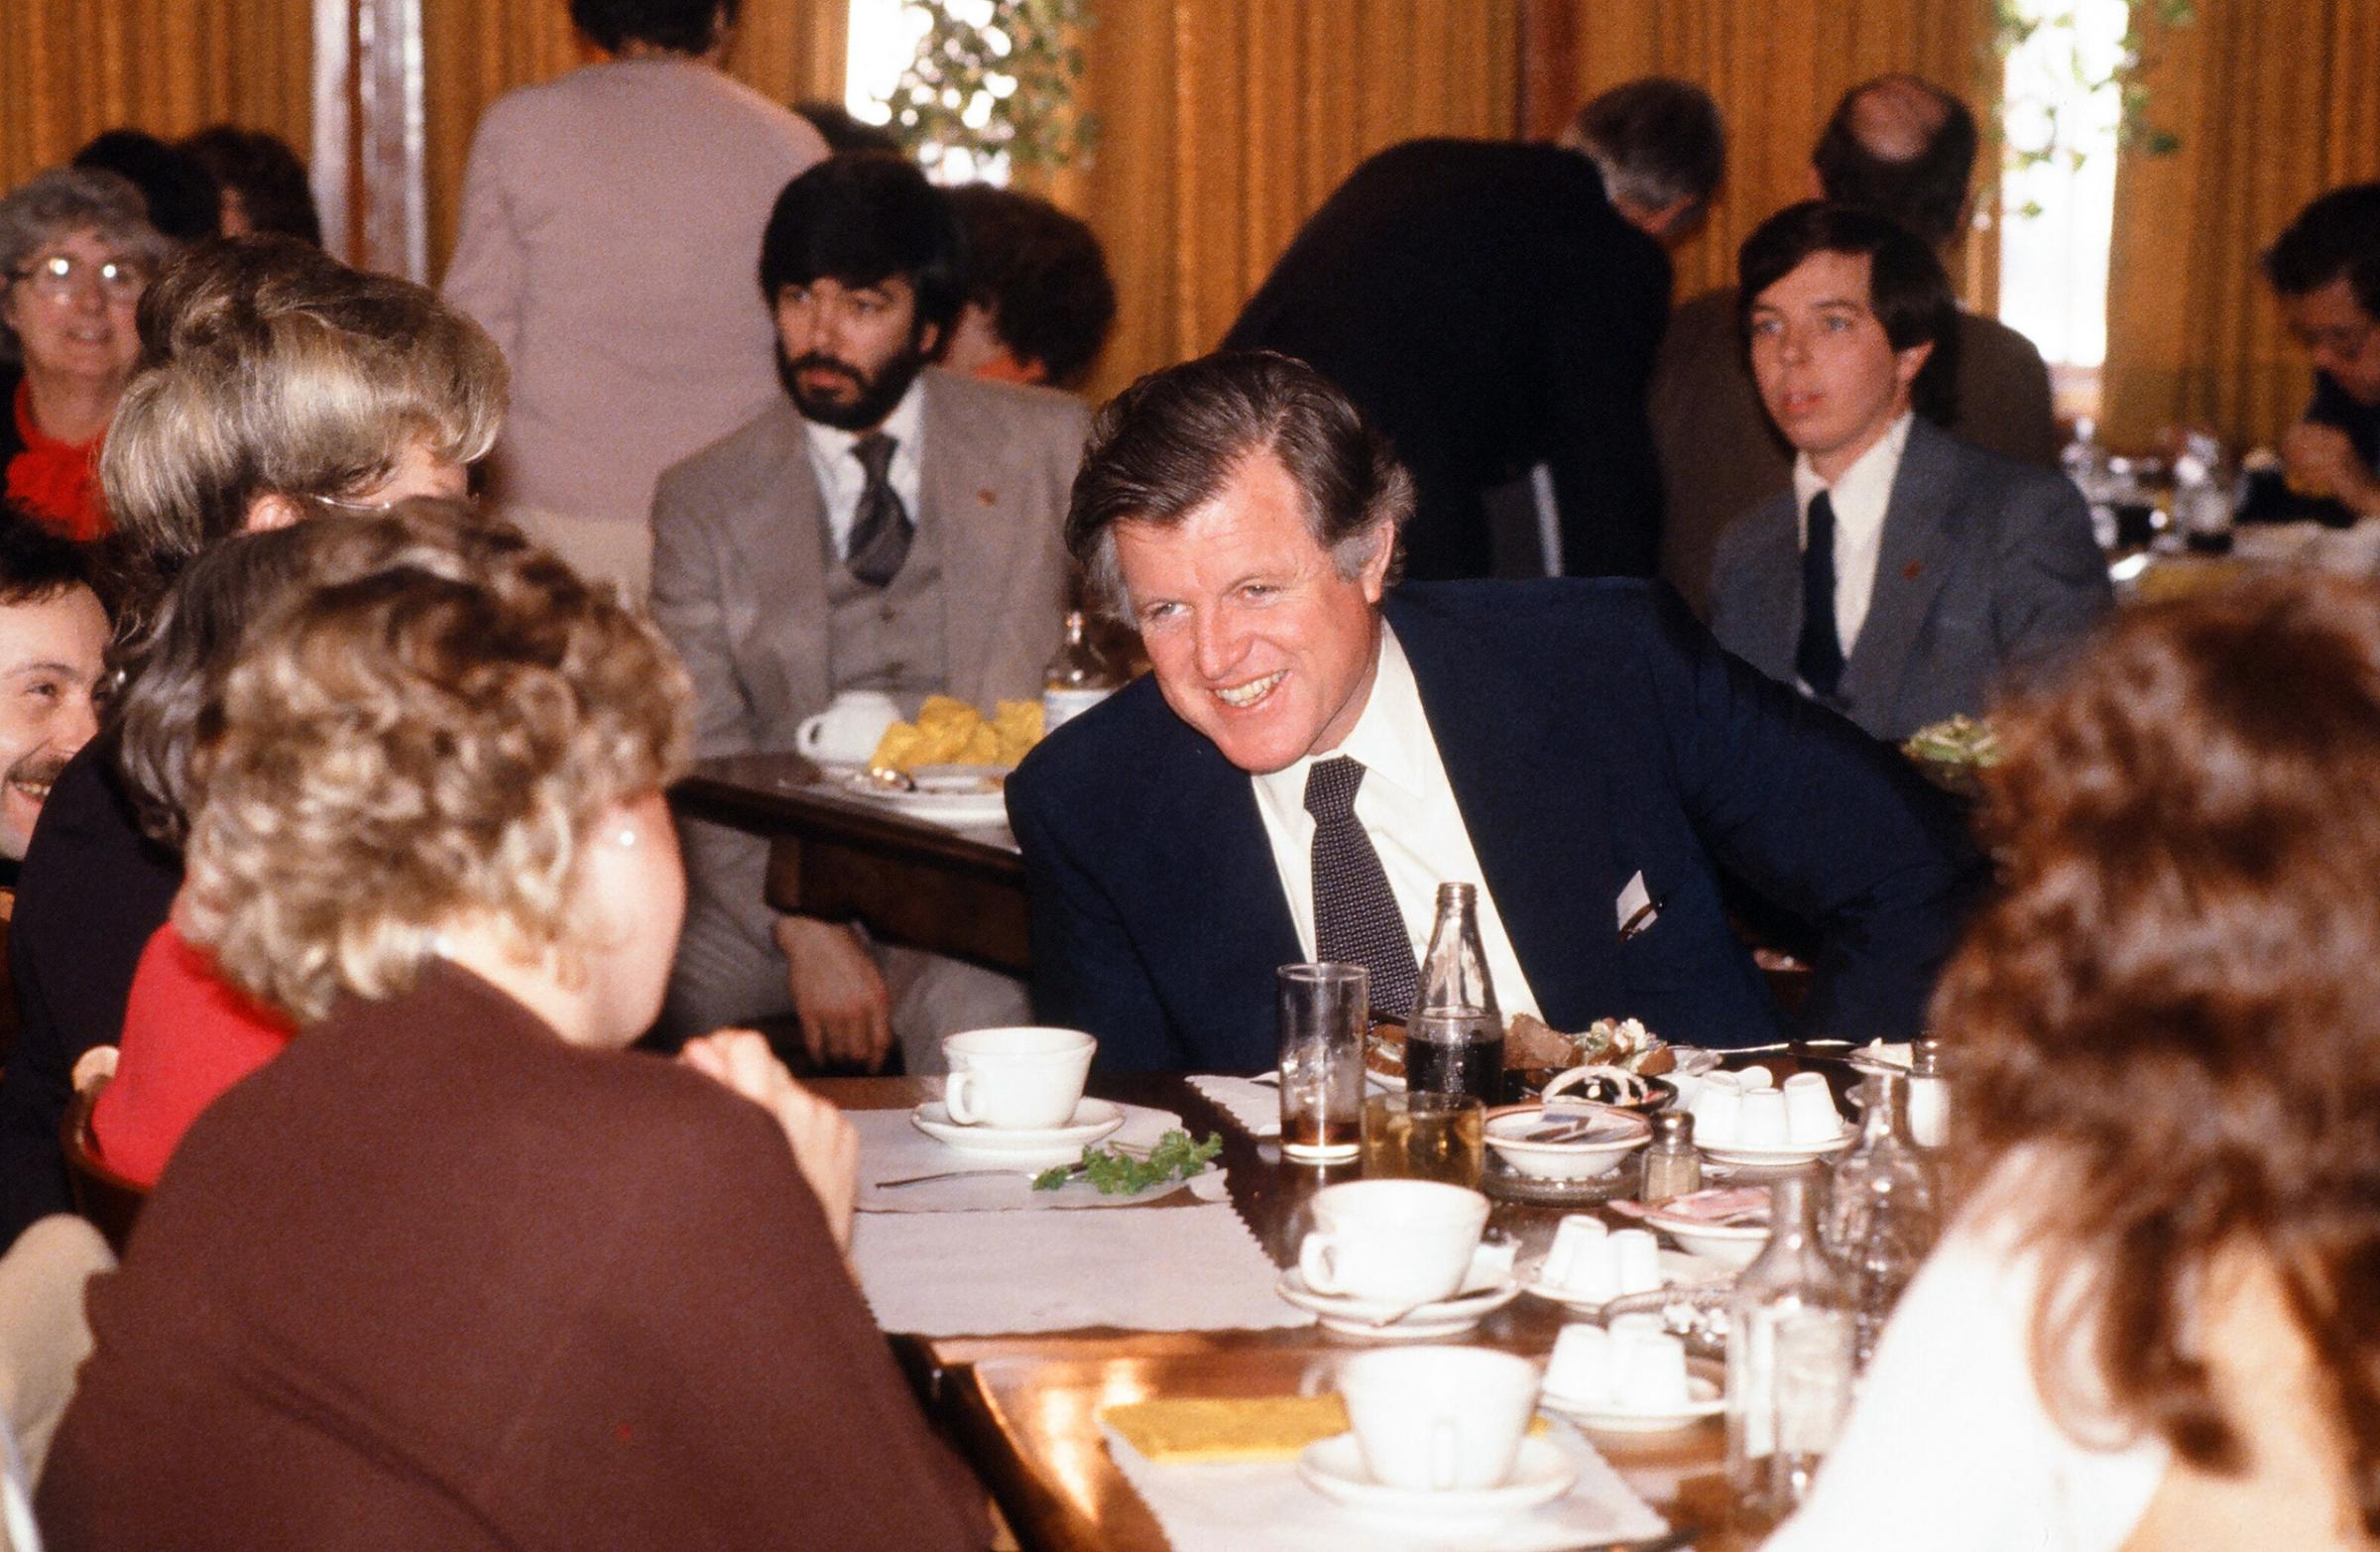 Senator Ted Kennedy laughs as he shares a meal with unidentified supporters at a restaurant during his campaign tour for the Democratic nomination for president, 1980.